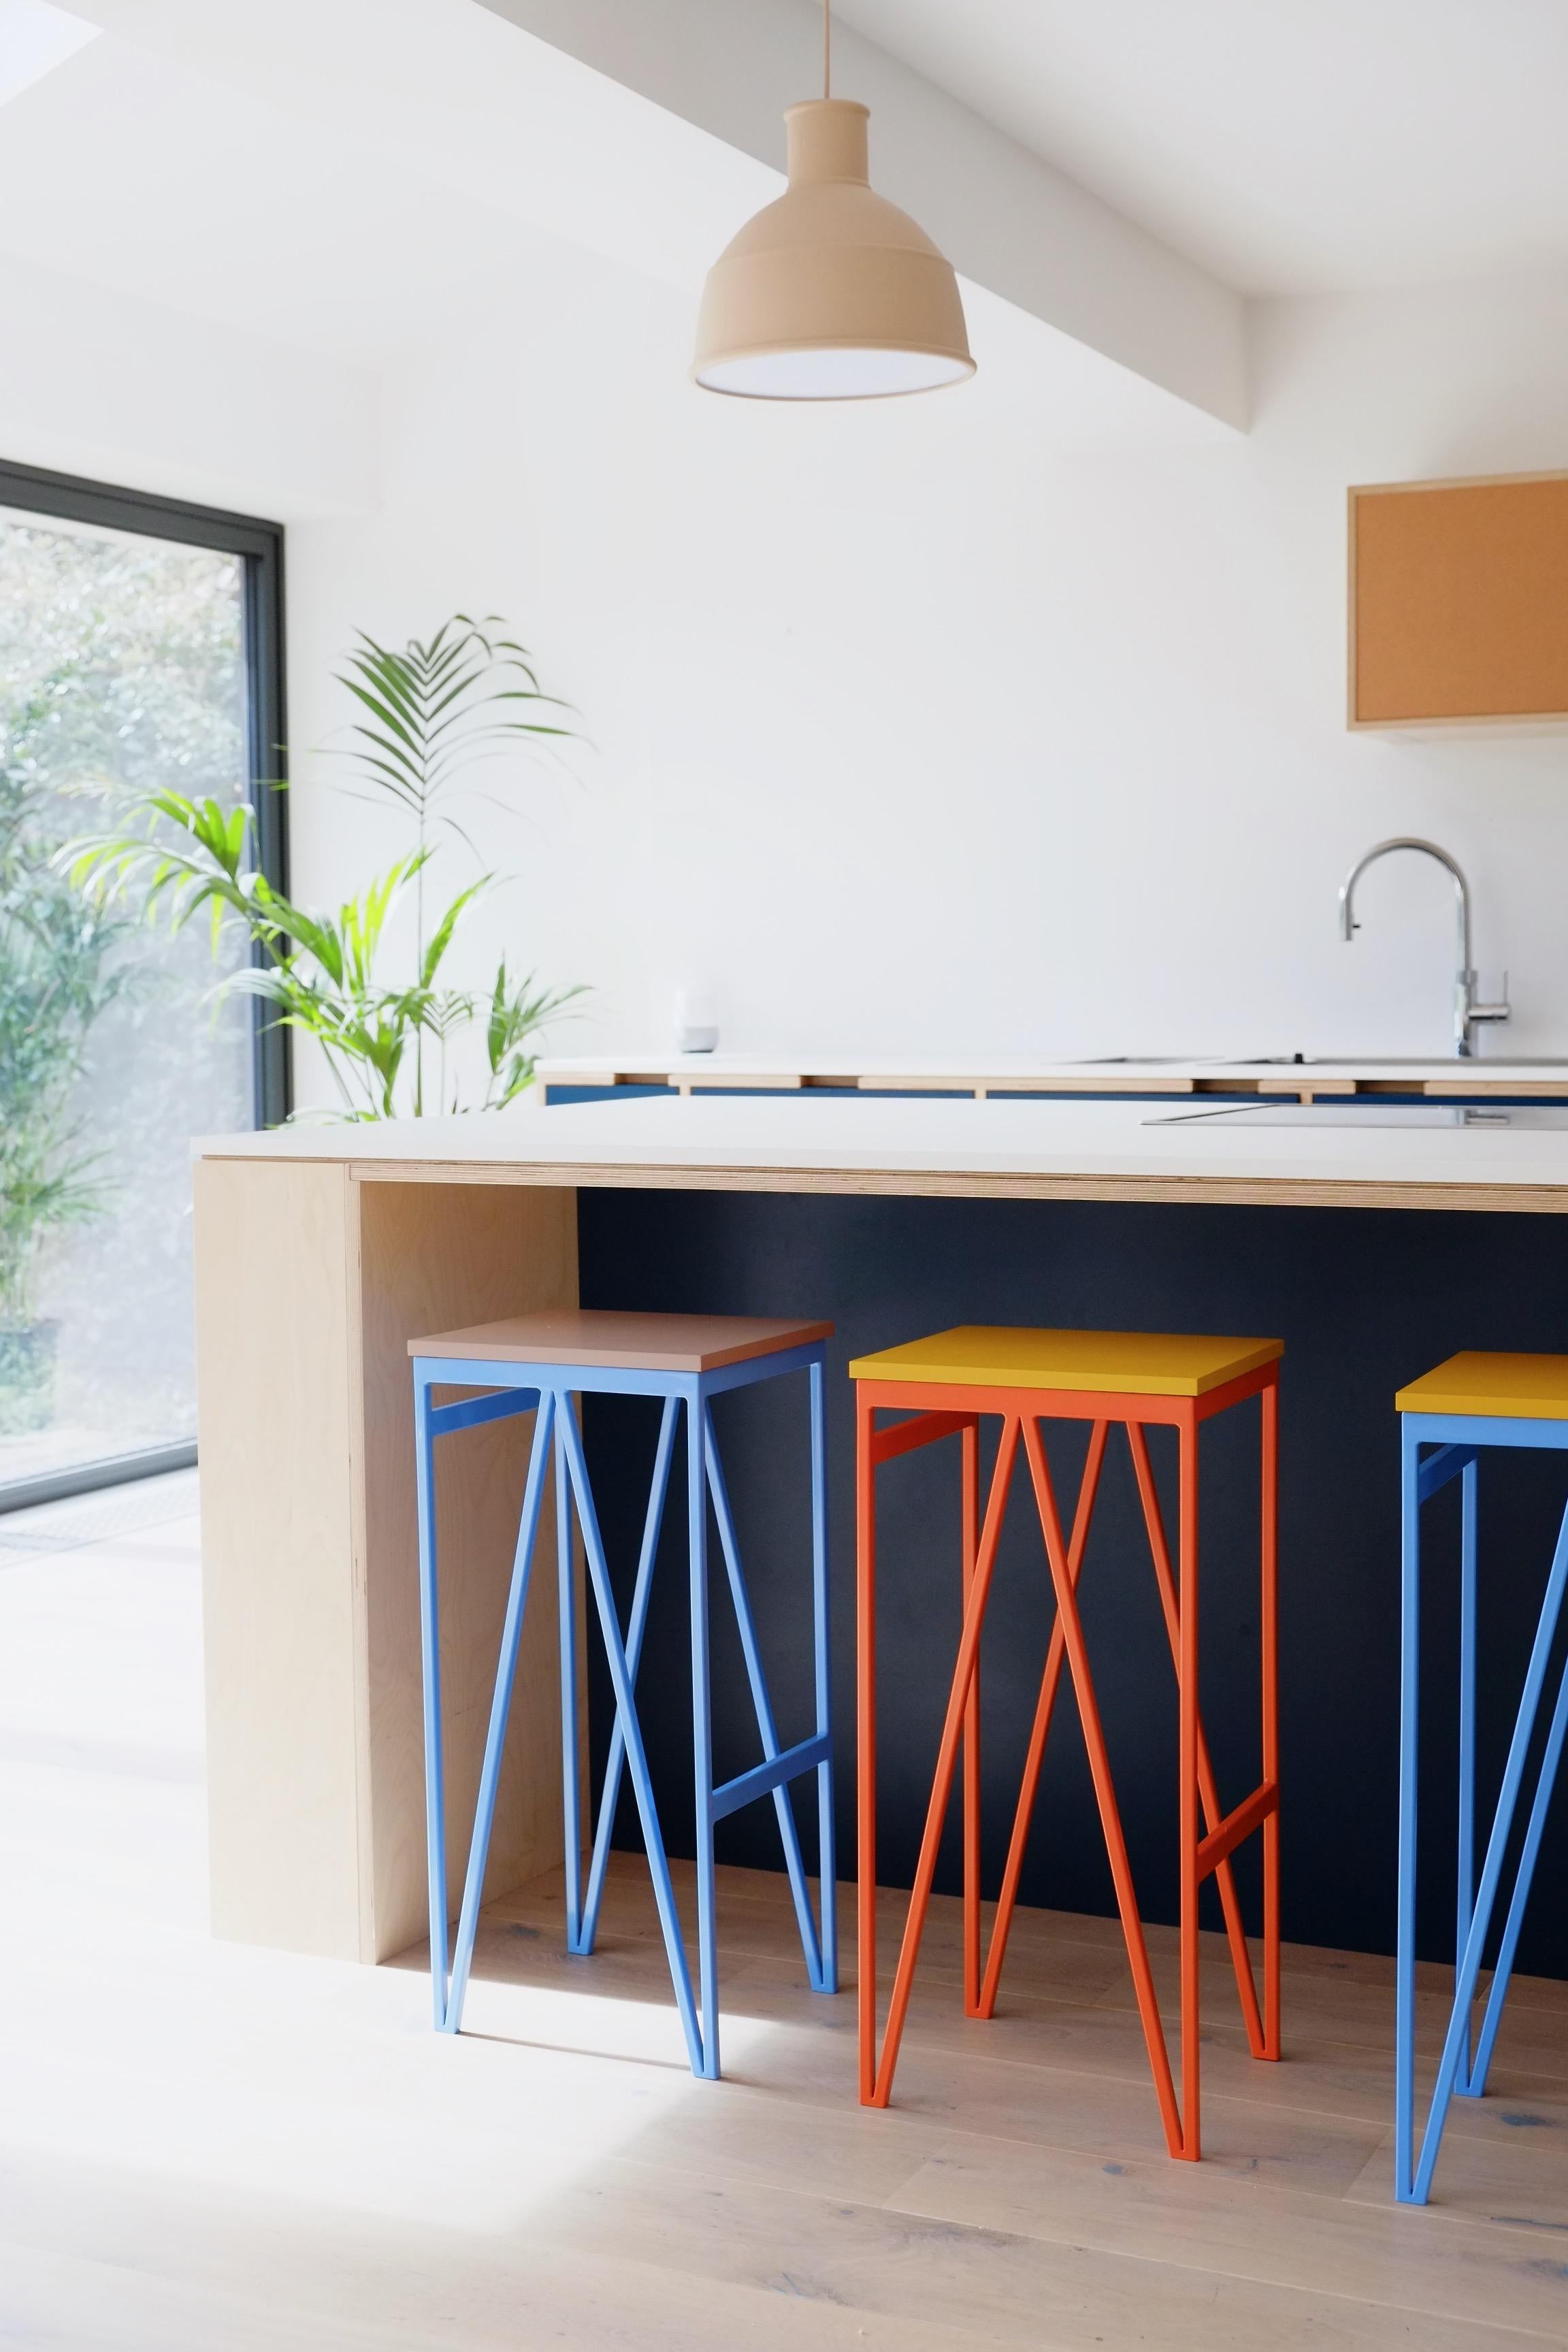 The kitchen counter stools are part of & New’s color play dining room collection, which consists of dining tables, benches, stools, and cabinets made in Britain by local craftsmen.

The design of the collection was driven by function and the